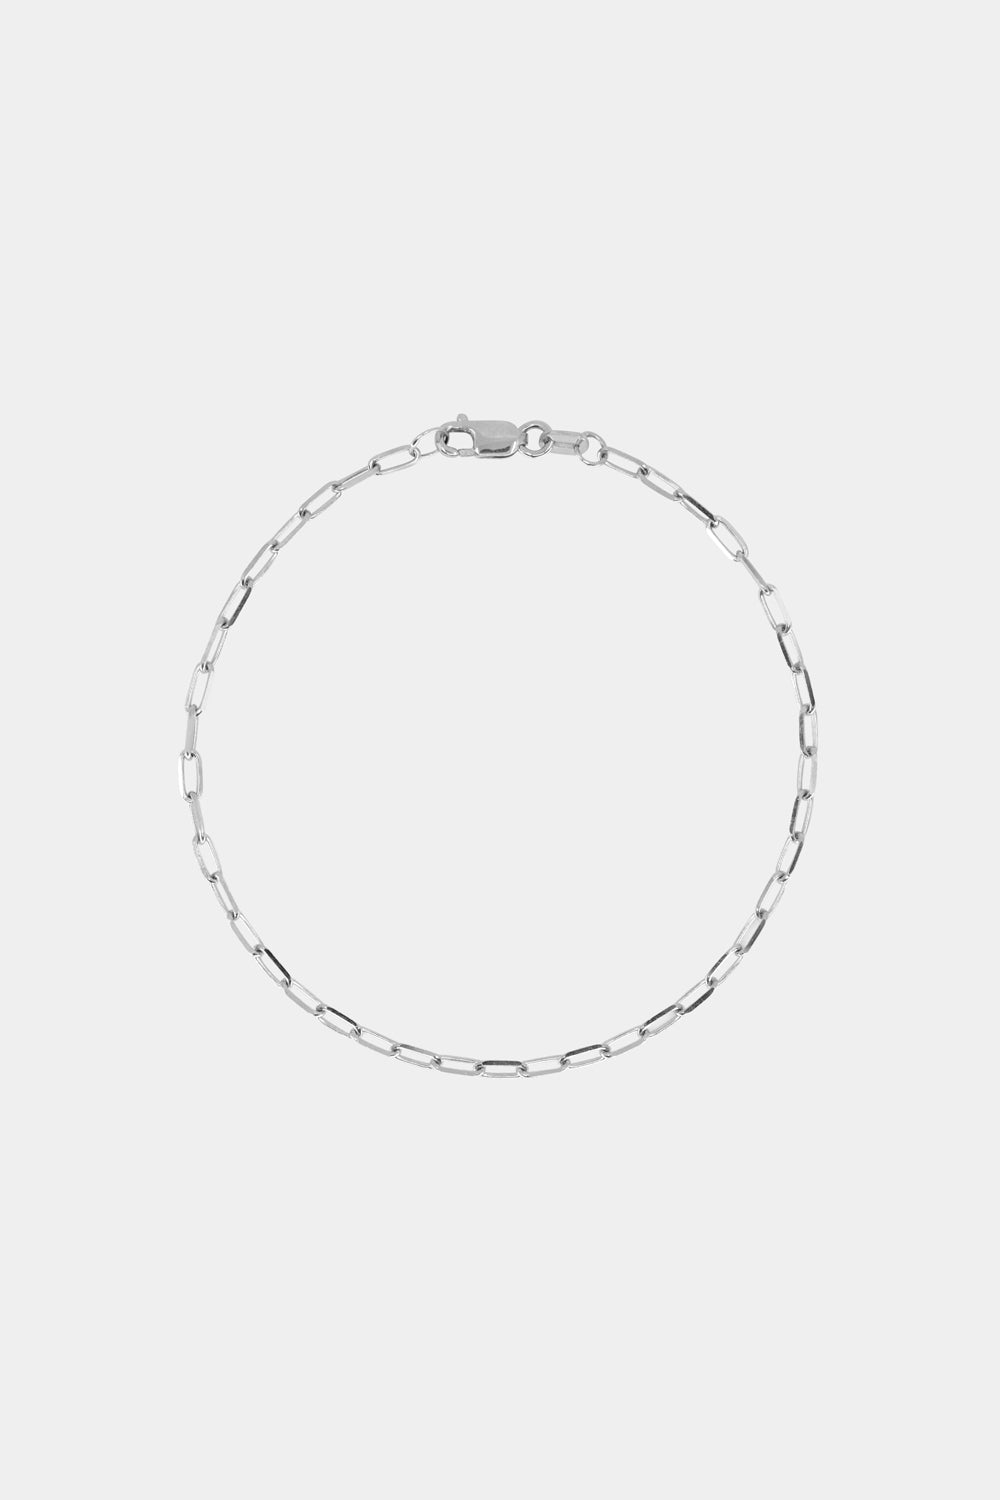 Mina Bracelet | Silver or 9K White Gold, More Options Available